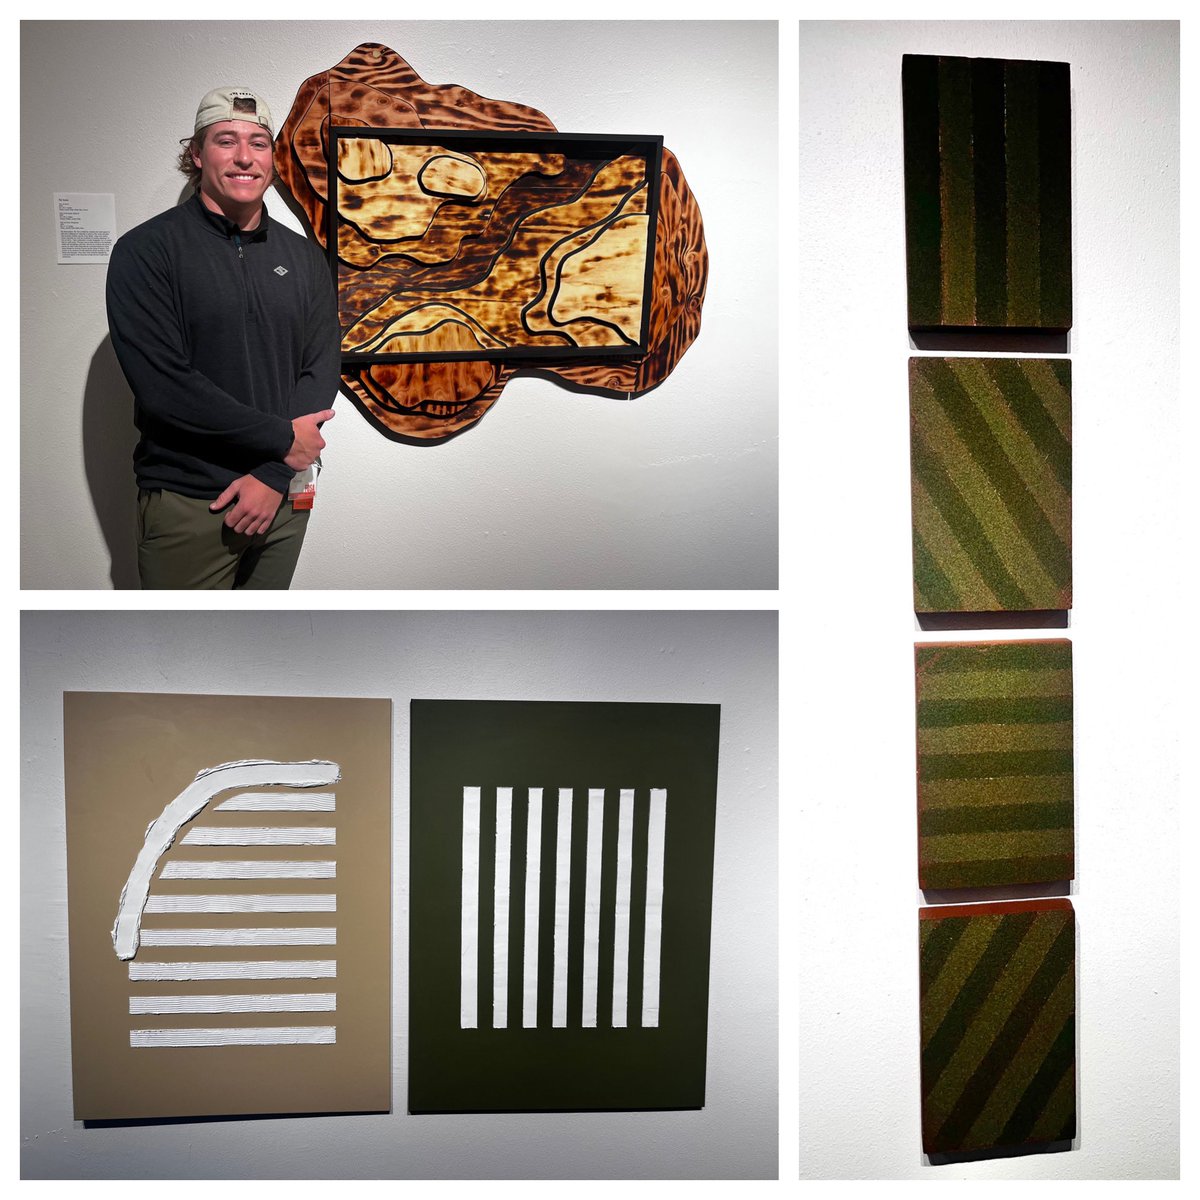 How about our guy Tal Jones?! Having chosen to peruse a career in the golf design & course management field, the senior art major used his passion to create some impressive golf course inspired works of art for the Senior Art show at the Hoffman Gallery. Great work, Tal!